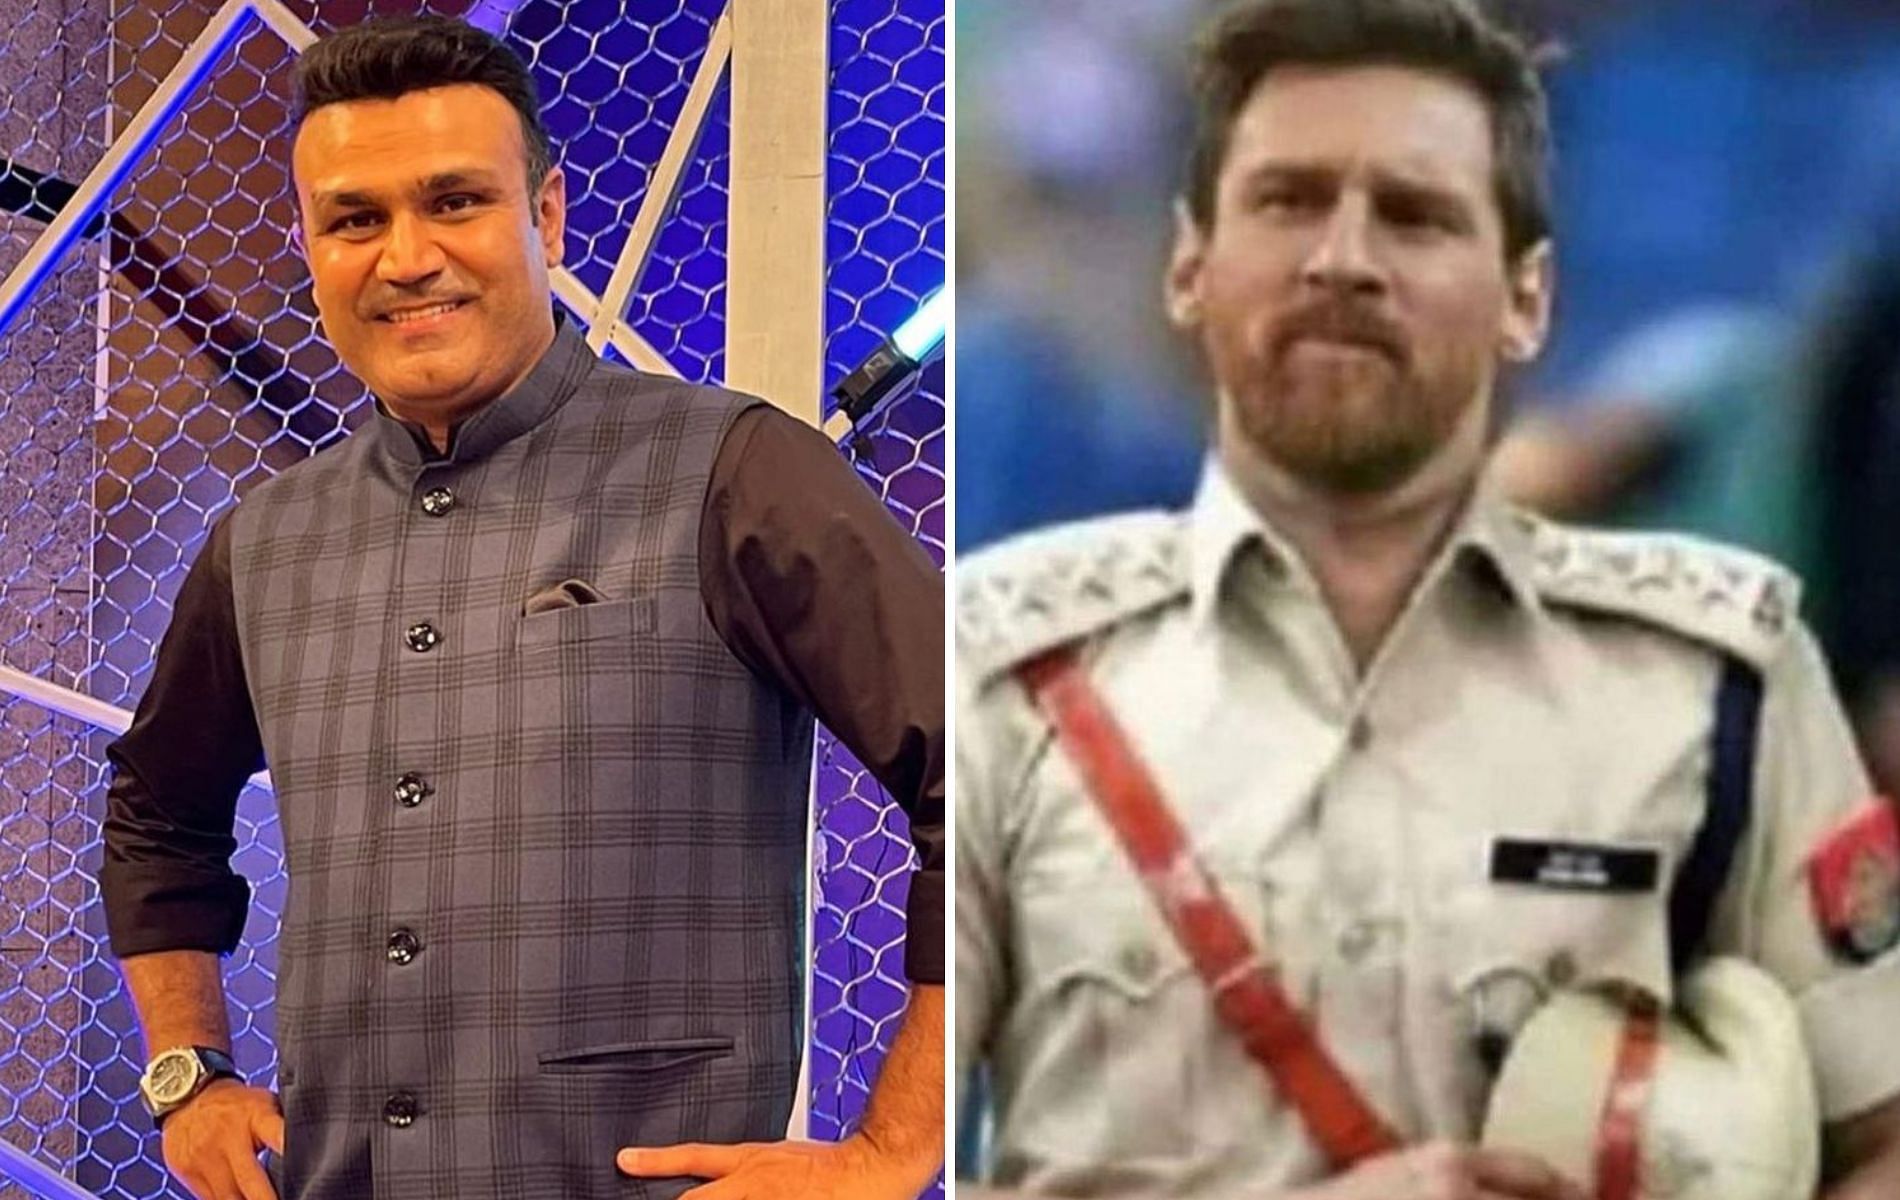 Virender Sehwag (L) shared a meme featuring Lionel Messi (R). (Pics: Instagram)